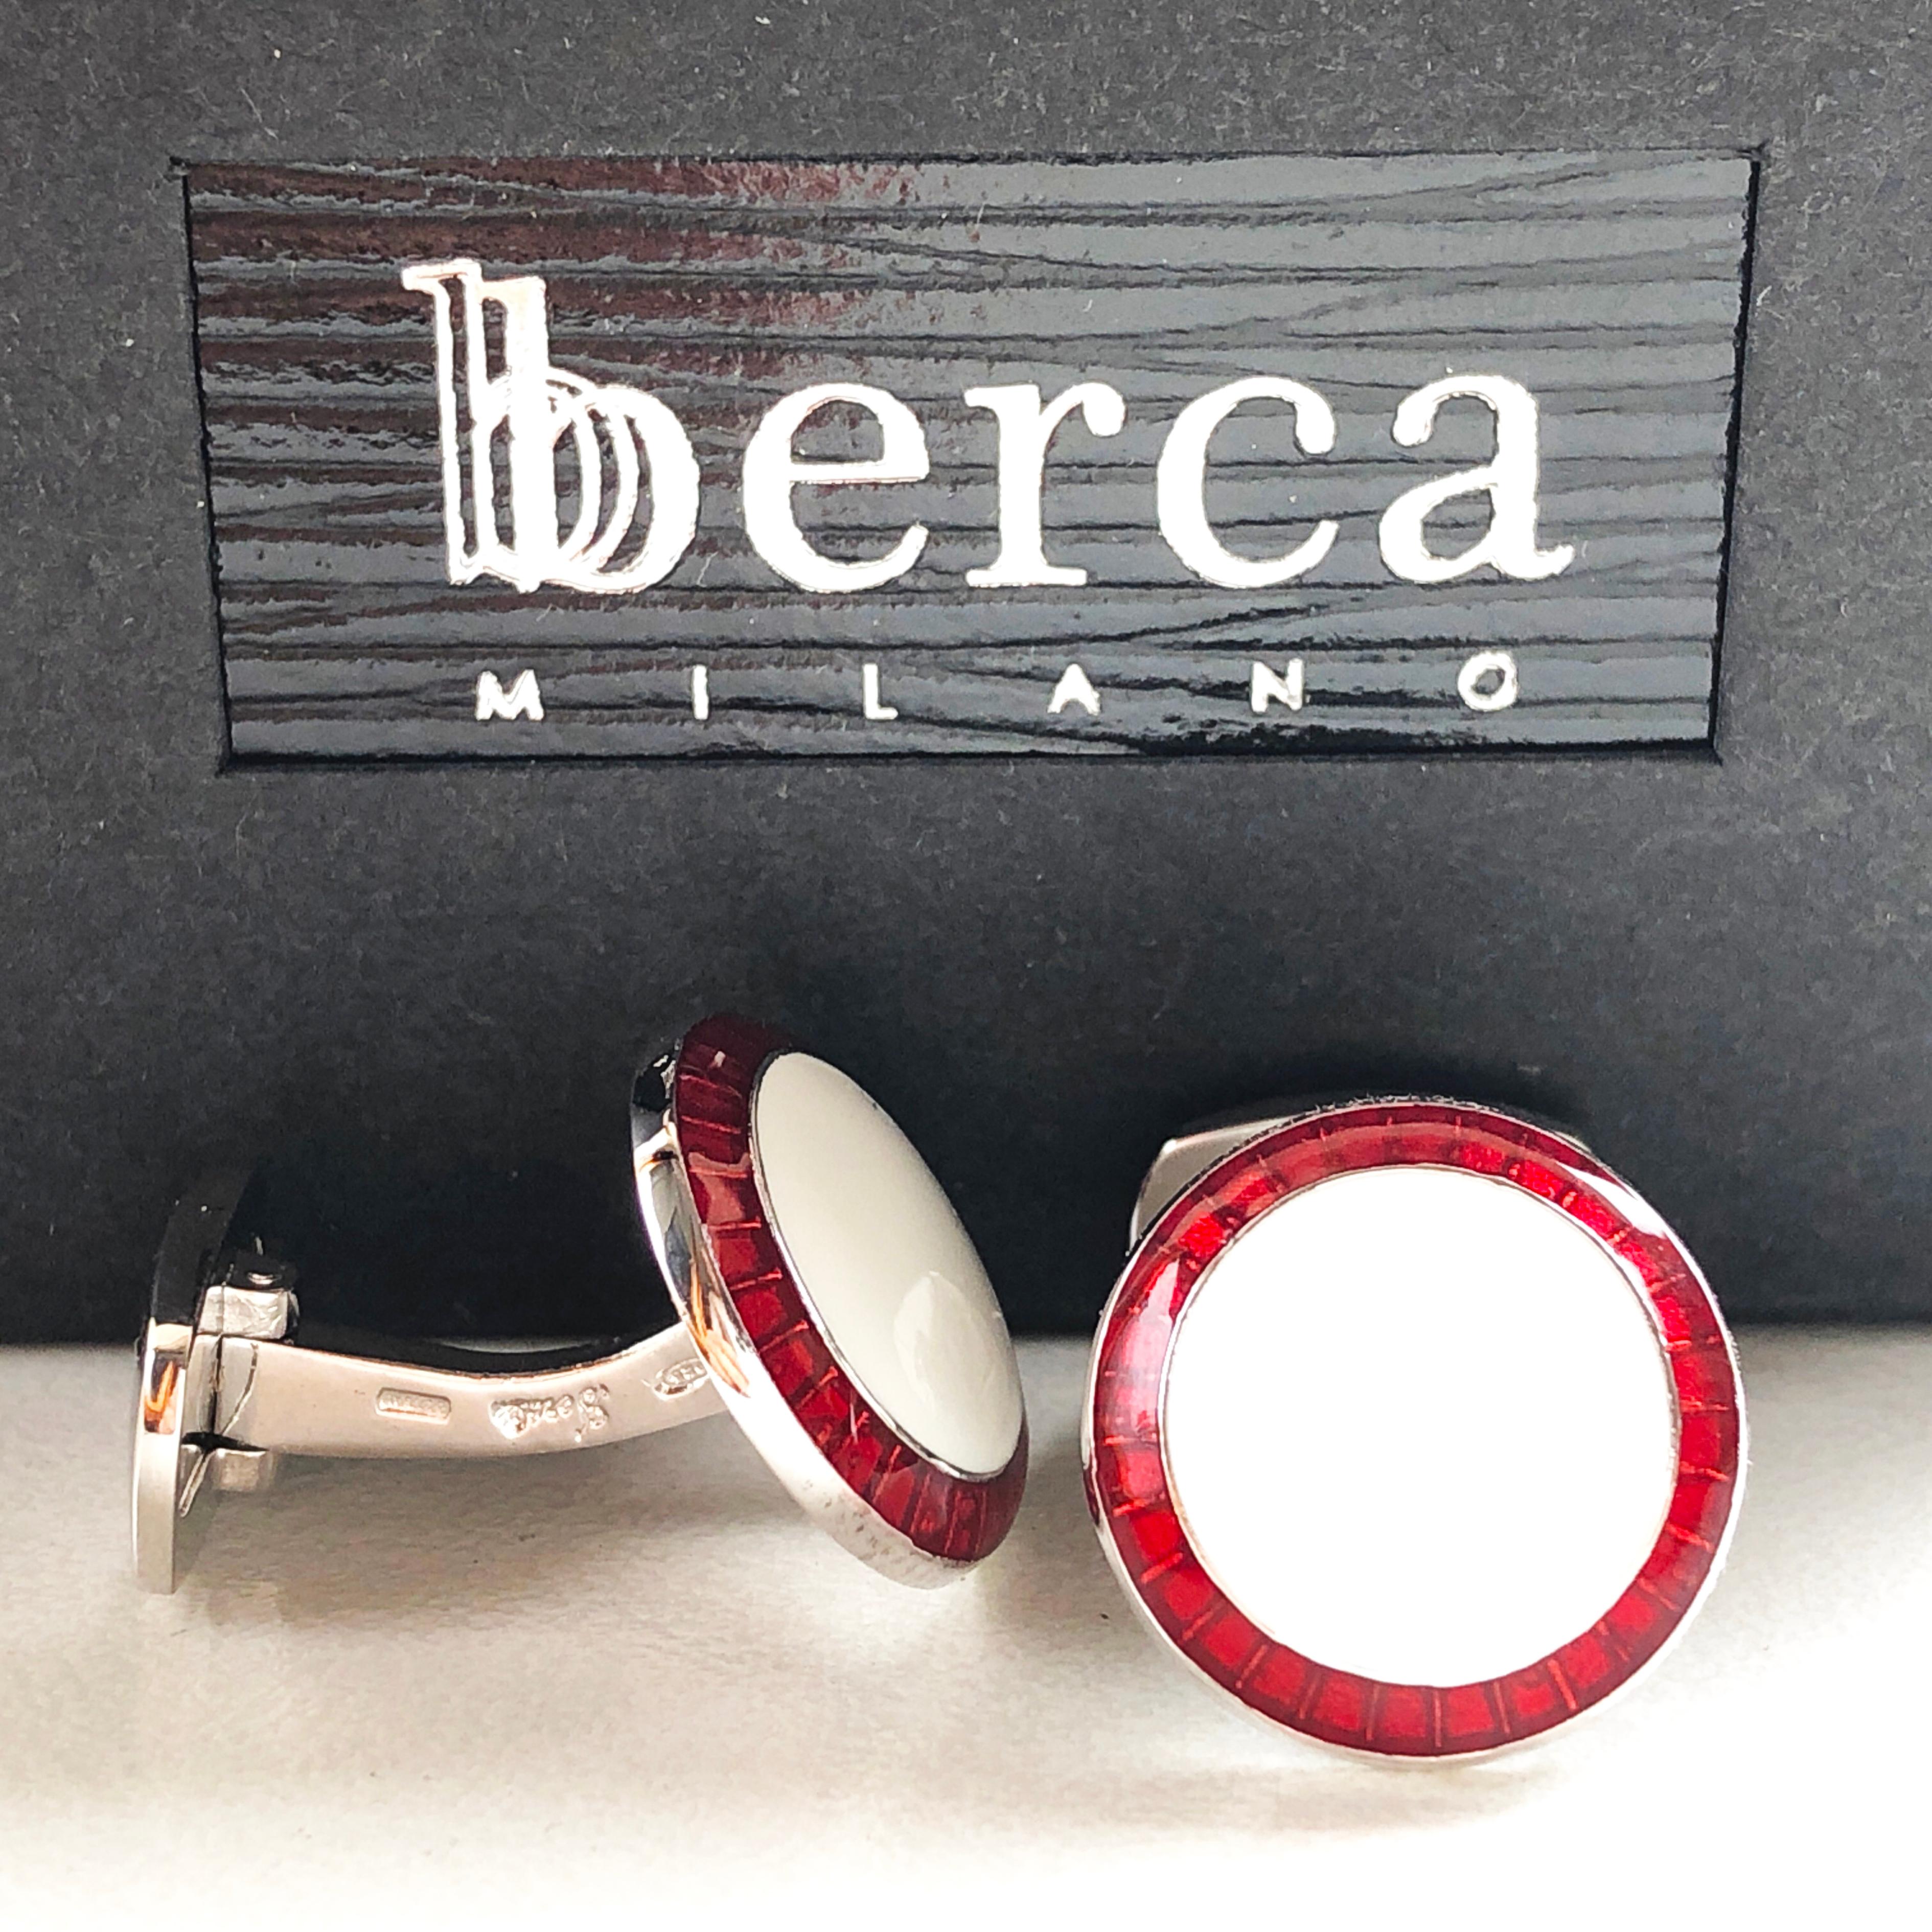 Chic yet Timeless Round White, Transparent Vivid Red Border Hand Enamelled Sterling Silver Cufflinks, T-bar back.

In our Smart Black Box and Pouch.

Front Diameter about 0.633 inches.